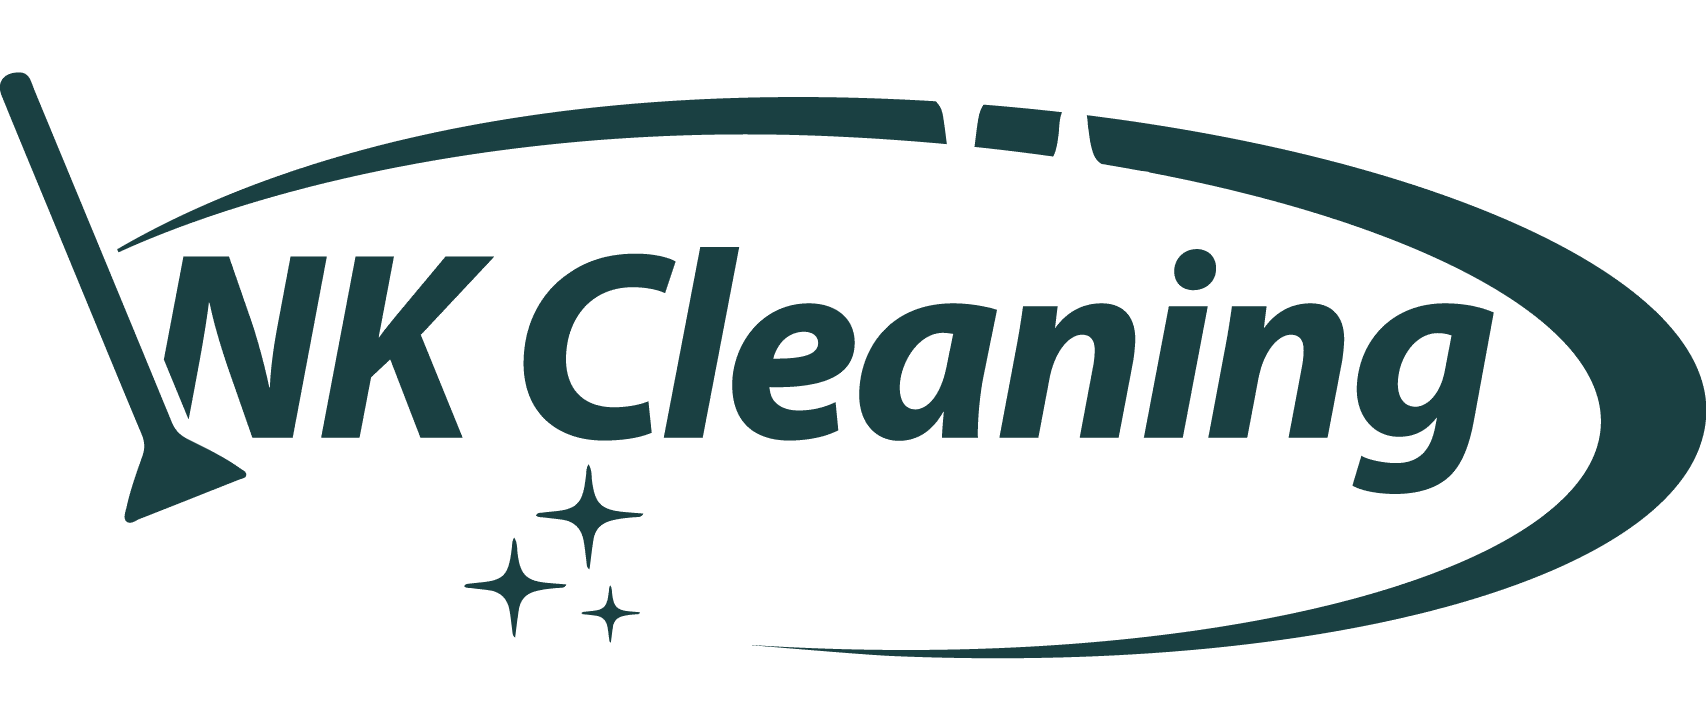 NK Cleaningservice